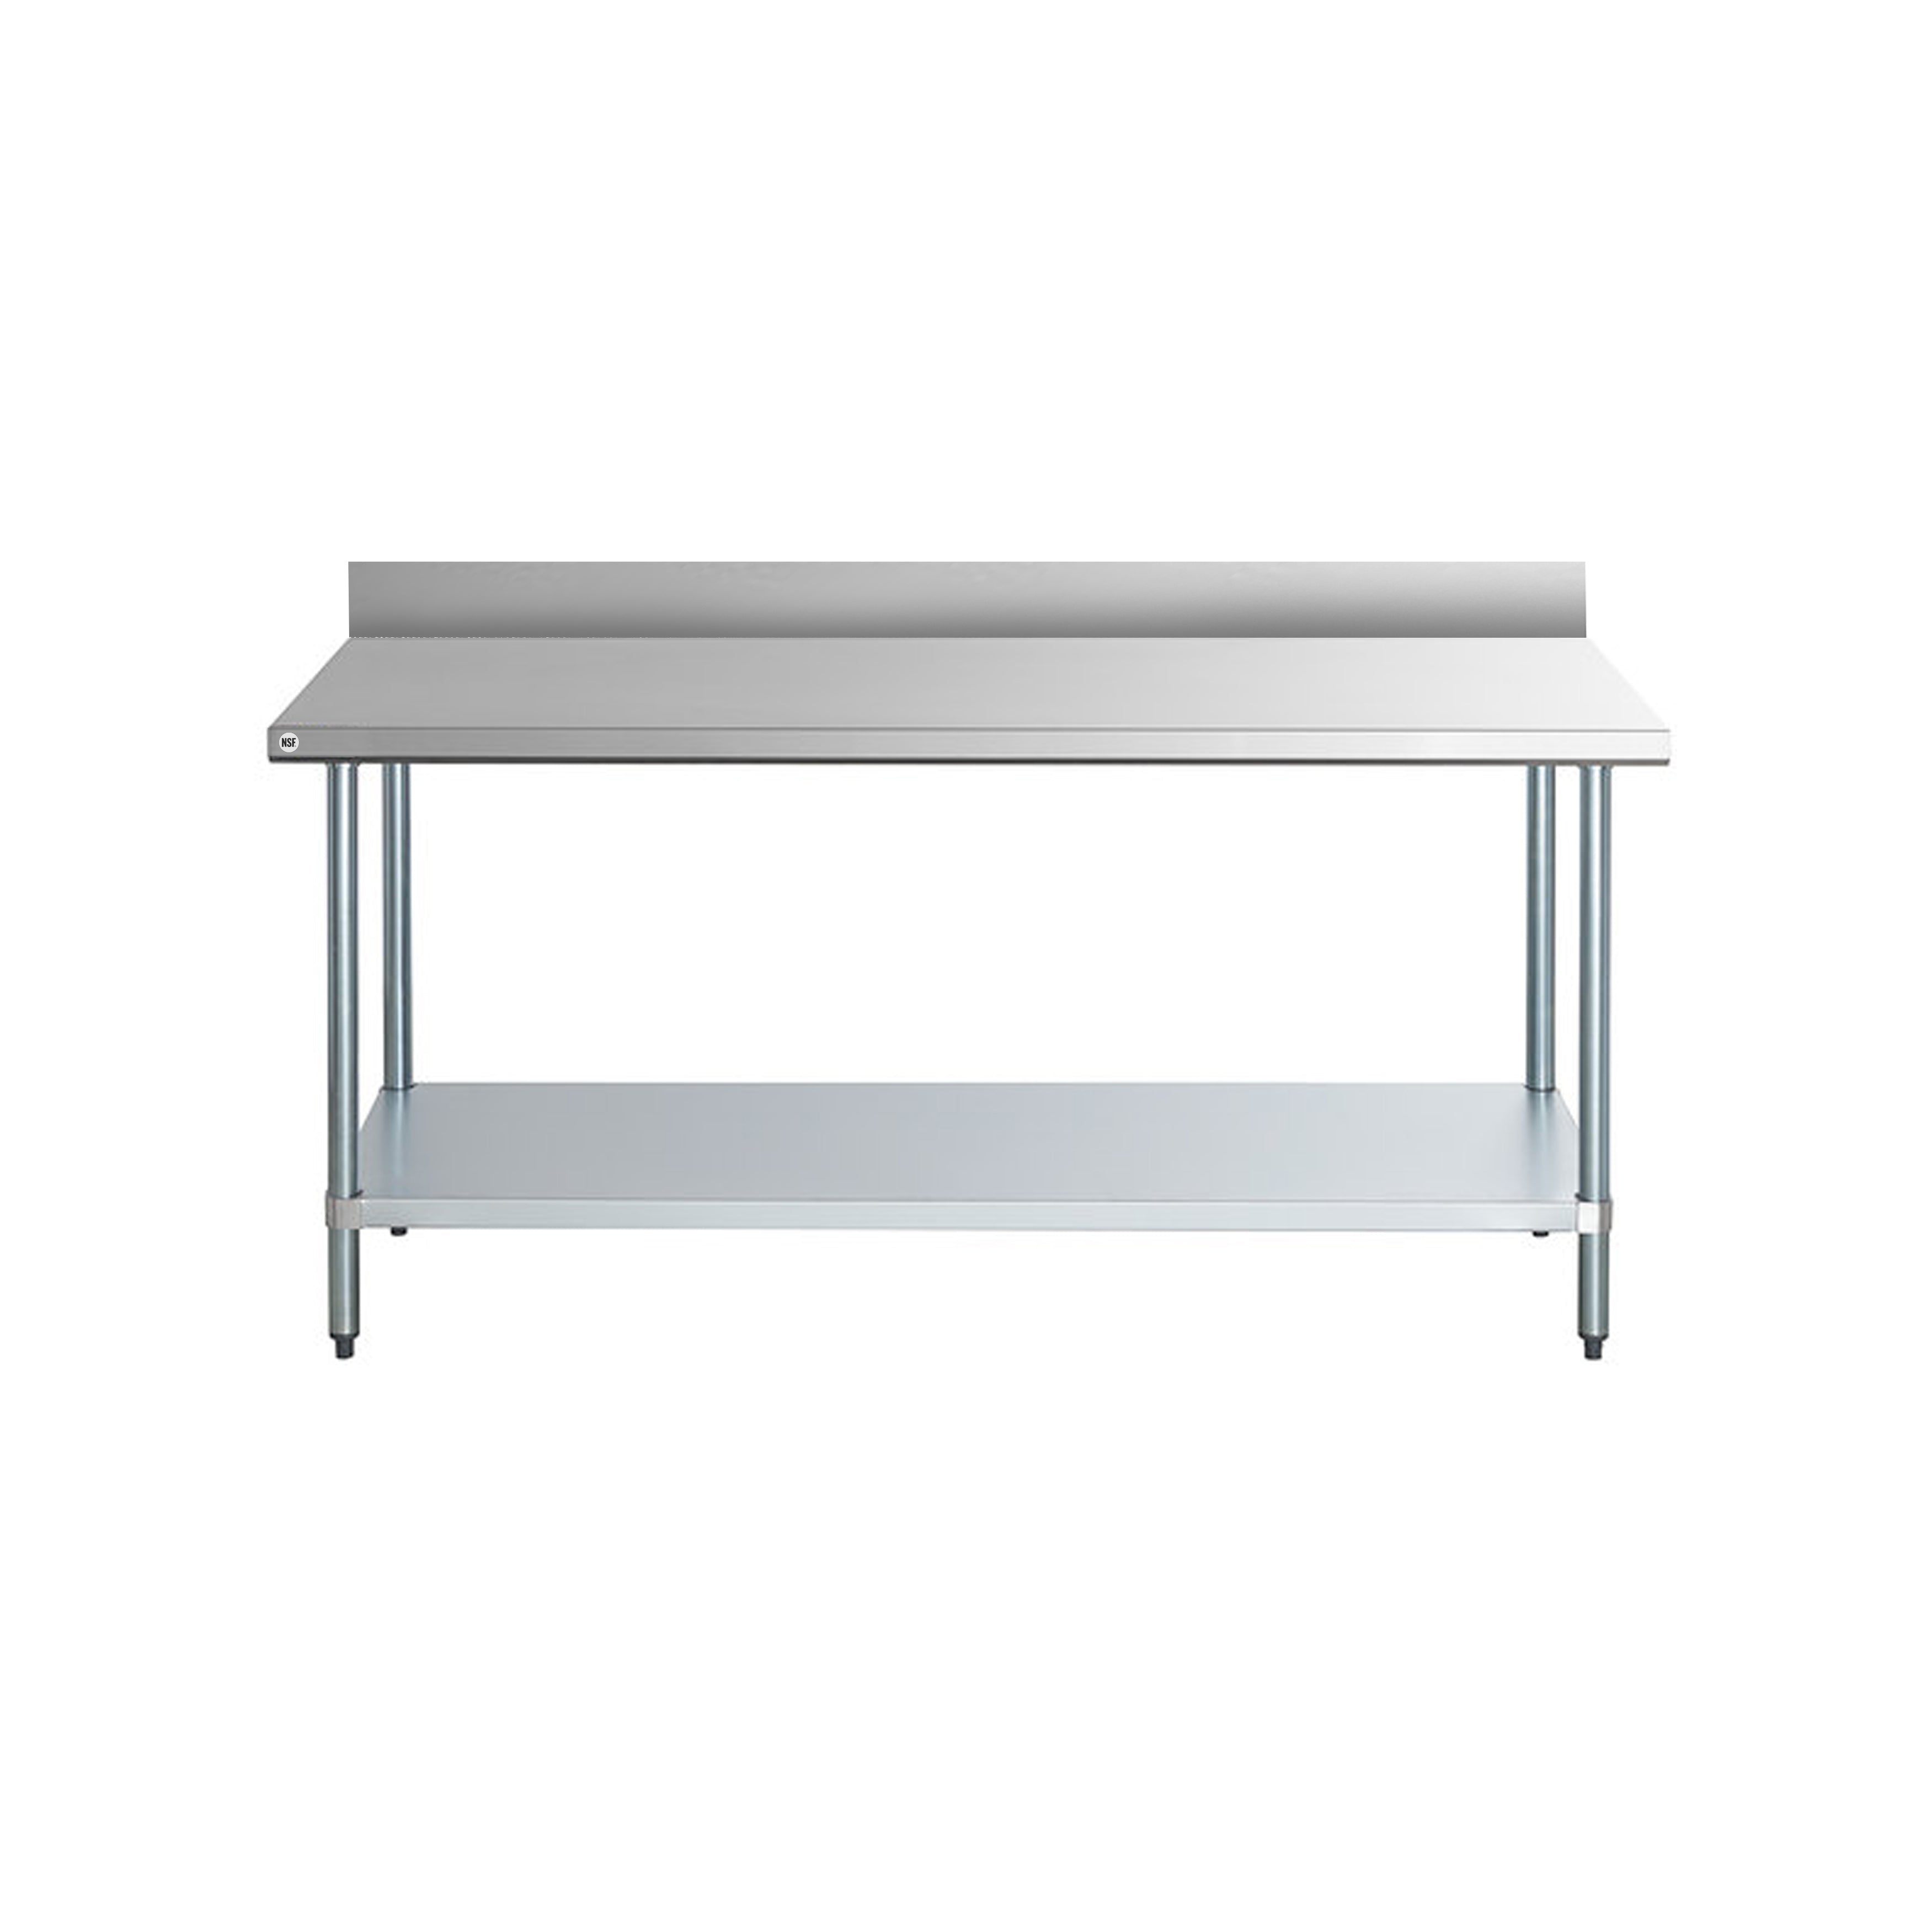 Omcan - 23794, Commercial 30" x 24" Stainless Steel Kitchen Work Table with 4" BackSplash 800lbs Medium Duty